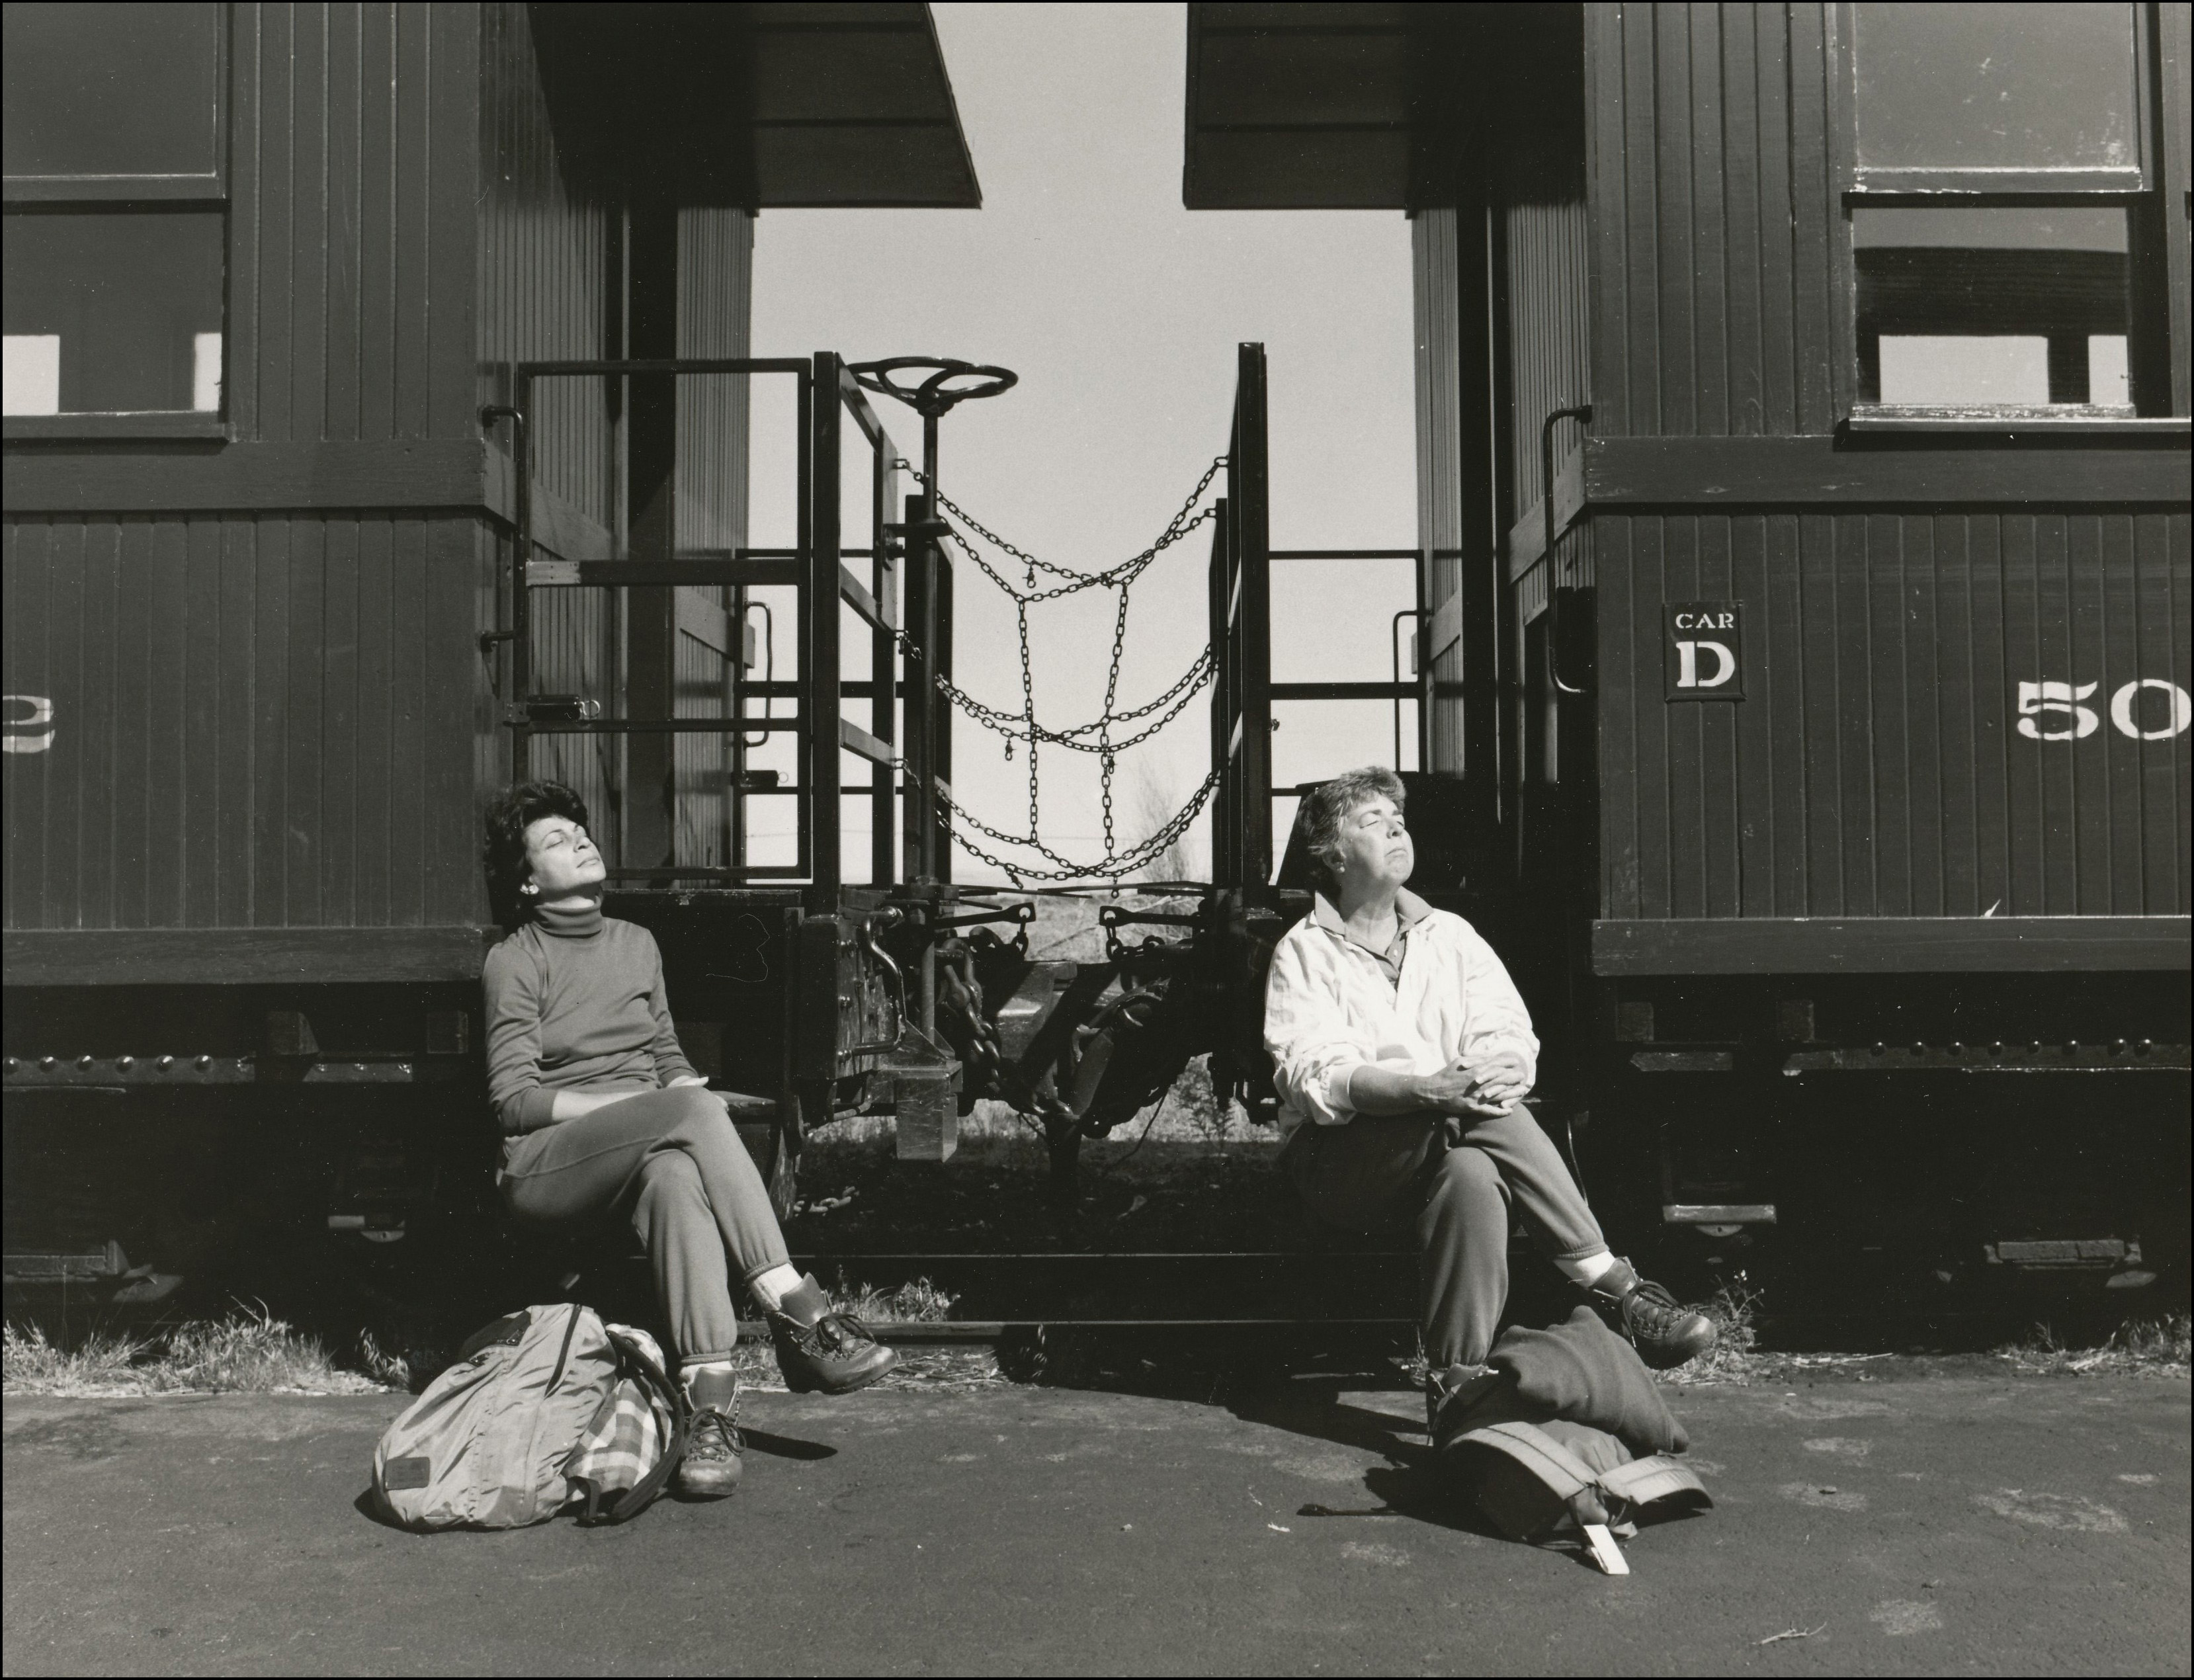 Two women waiting for a train. Sitting on the edge of the car stairs with eyes closed & faces pointed up towards the sun, legs crossed and their bundles of belongings at their feet.